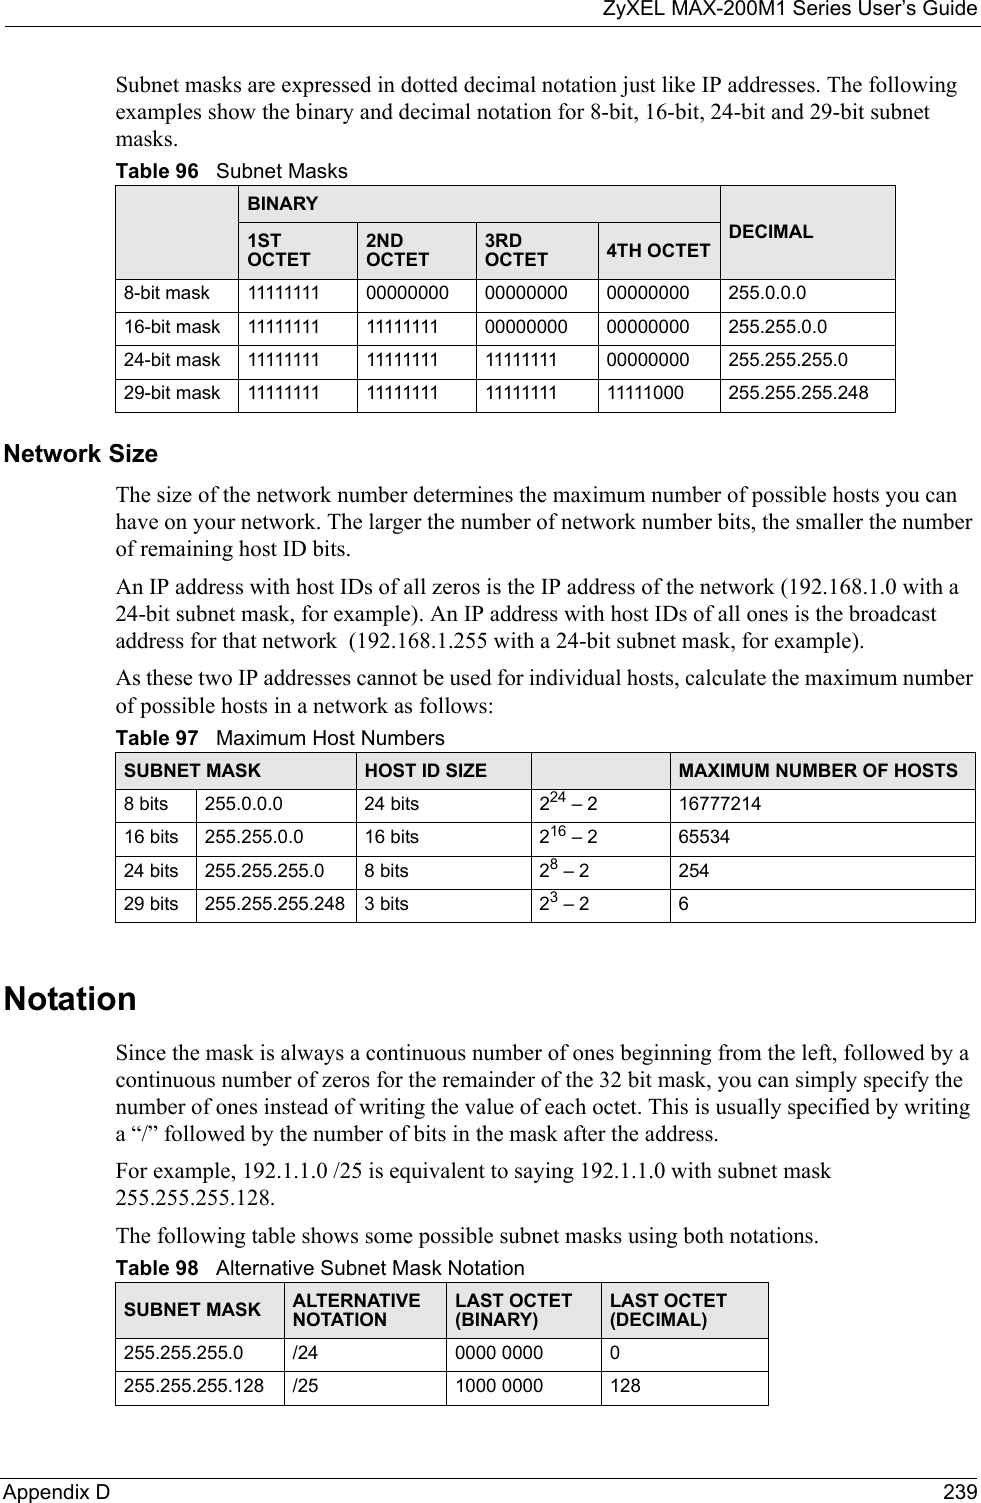 ZyXEL MAX-200M1 Series User’s GuideAppendix D 239Subnet masks are expressed in dotted decimal notation just like IP addresses. The following examples show the binary and decimal notation for 8-bit, 16-bit, 24-bit and 29-bit subnet masks. Network SizeThe size of the network number determines the maximum number of possible hosts you can have on your network. The larger the number of network number bits, the smaller the number of remaining host ID bits. An IP address with host IDs of all zeros is the IP address of the network (192.168.1.0 with a 24-bit subnet mask, for example). An IP address with host IDs of all ones is the broadcast address for that network  (192.168.1.255 with a 24-bit subnet mask, for example).As these two IP addresses cannot be used for individual hosts, calculate the maximum number of possible hosts in a network as follows:NotationSince the mask is always a continuous number of ones beginning from the left, followed by a continuous number of zeros for the remainder of the 32 bit mask, you can simply specify the number of ones instead of writing the value of each octet. This is usually specified by writing a “/” followed by the number of bits in the mask after the address. For example, 192.1.1.0 /25 is equivalent to saying 192.1.1.0 with subnet mask 255.255.255.128. The following table shows some possible subnet masks using both notations. Table 96   Subnet MasksBINARYDECIMAL1ST OCTET2ND OCTET3RD OCTET 4TH OCTET8-bit mask 11111111 00000000 00000000 00000000 255.0.0.016-bit mask 11111111 11111111 00000000 00000000 255.255.0.024-bit mask 11111111 11111111 11111111 00000000 255.255.255.029-bit mask 11111111 11111111 11111111 11111000 255.255.255.248Table 97   Maximum Host NumbersSUBNET MASK HOST ID SIZE MAXIMUM NUMBER OF HOSTS8 bits 255.0.0.0 24 bits 224 – 2 1677721416 bits 255.255.0.0 16 bits 216 – 2 6553424 bits 255.255.255.0 8 bits 28 – 2 25429 bits 255.255.255.248 3 bits 23 – 2 6Table 98   Alternative Subnet Mask NotationSUBNET MASK ALTERNATIVE NOTATIONLAST OCTET (BINARY)LAST OCTET (DECIMAL)255.255.255.0 /24 0000 0000 0255.255.255.128 /25 1000 0000 128